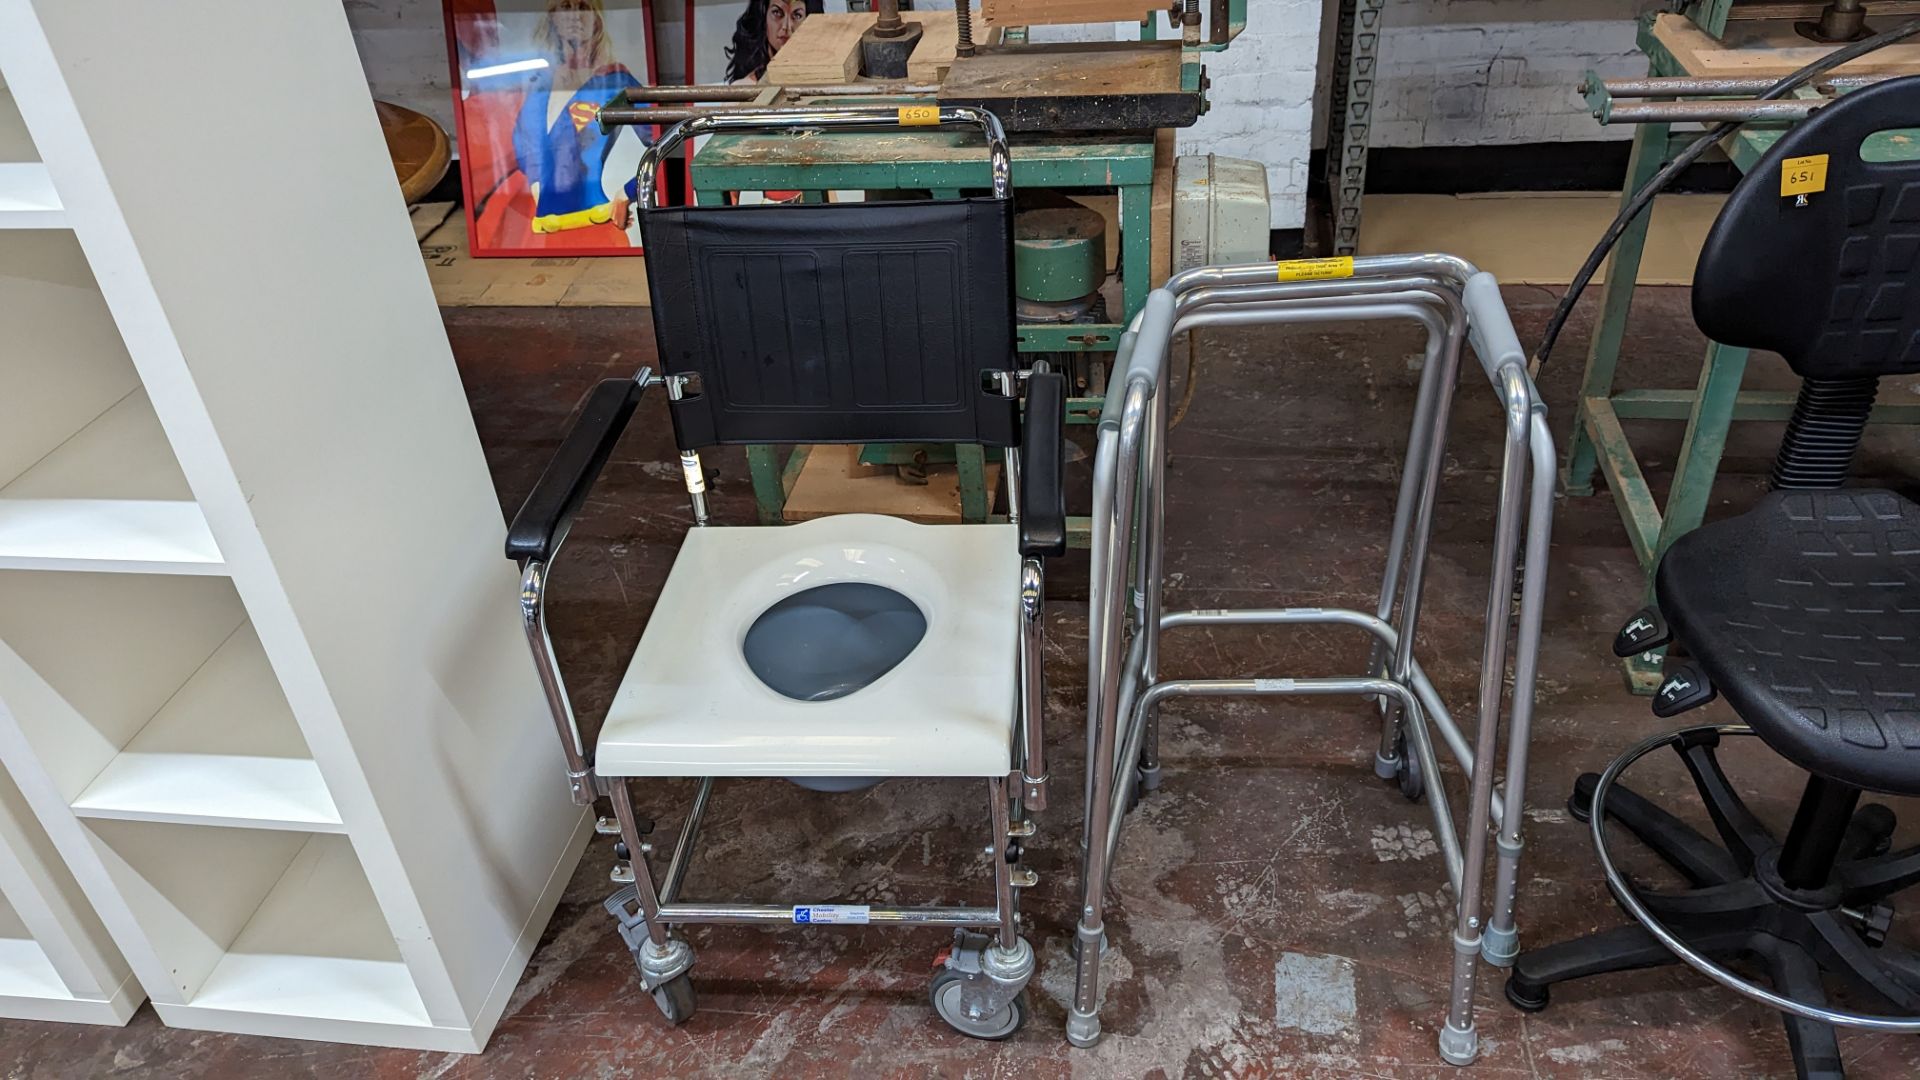 Mobile commode chair plus 2 mobile walking frames - Image 2 of 6